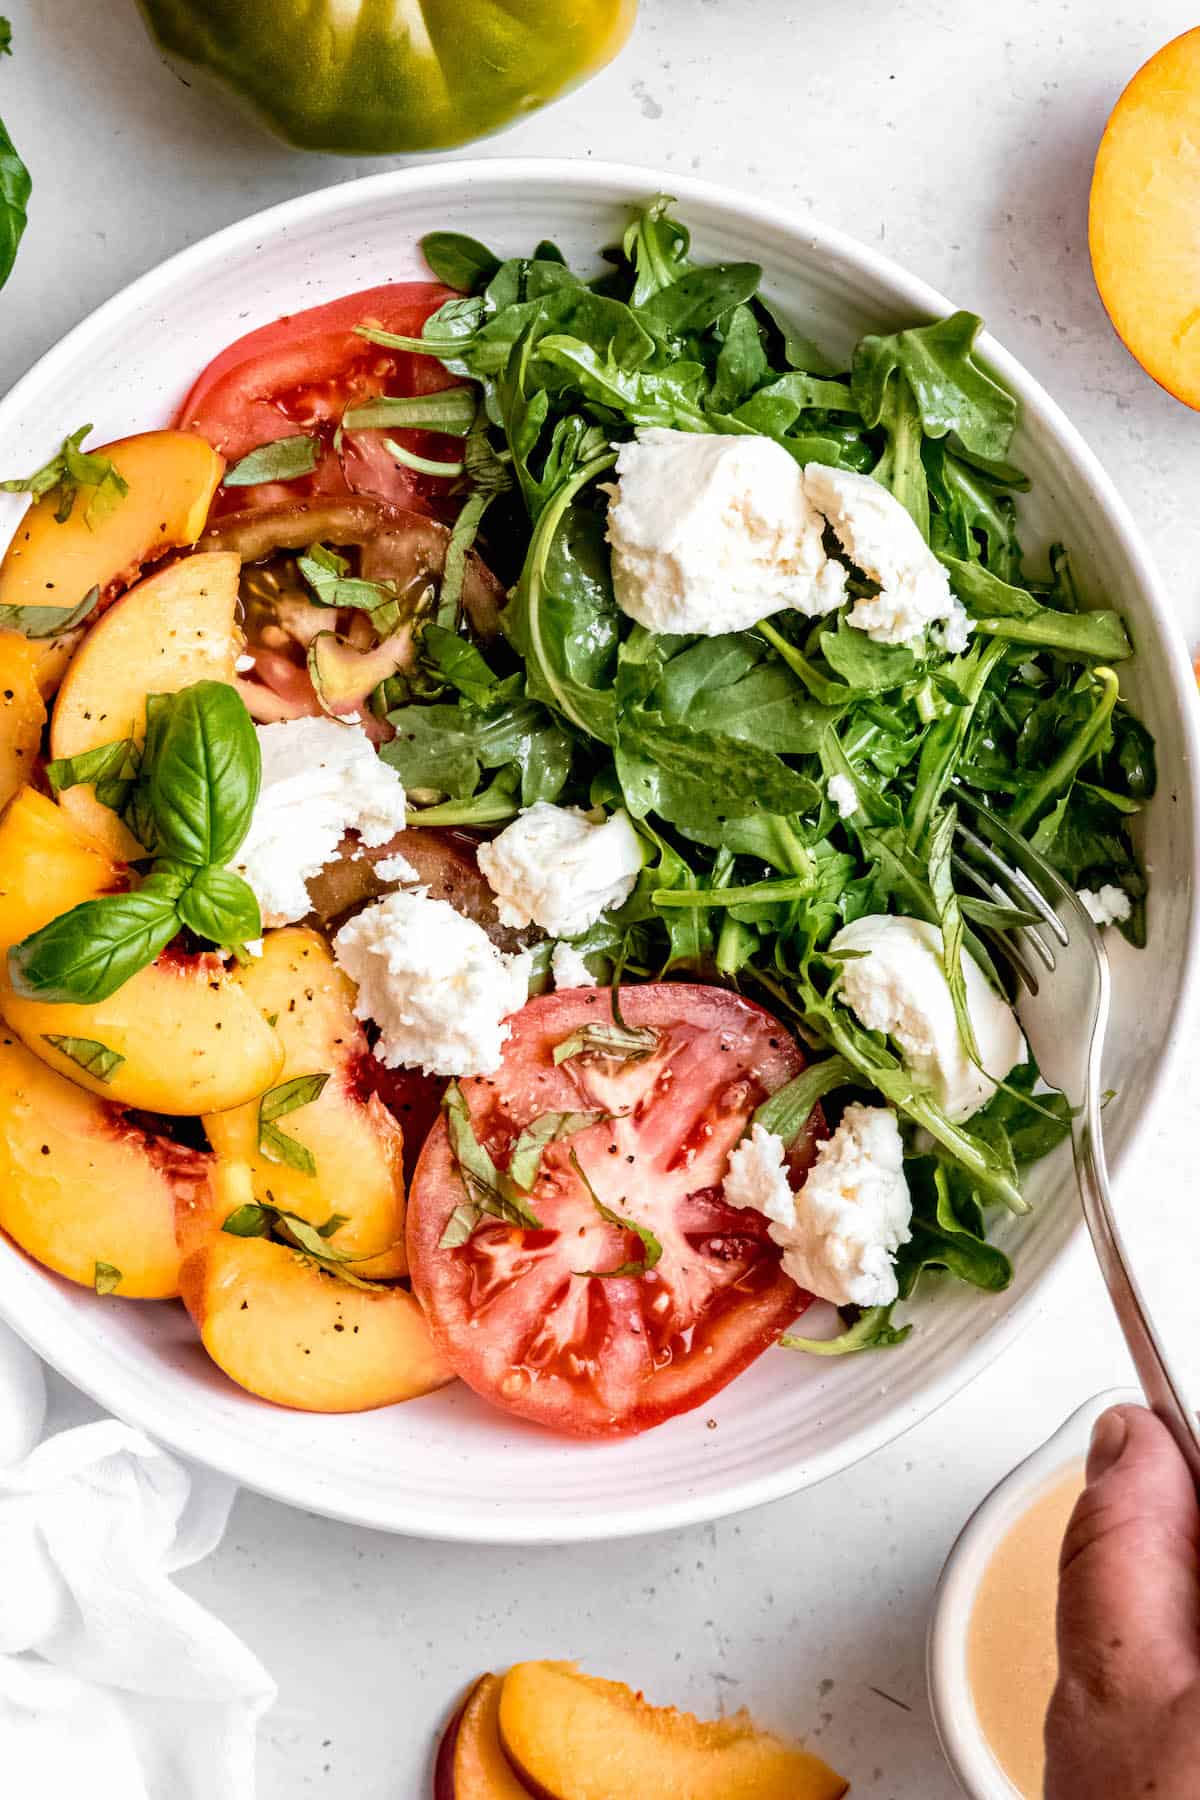 hand using a fork to take a bite of arugula and burrata from the tomato peach caprese salad bowl.